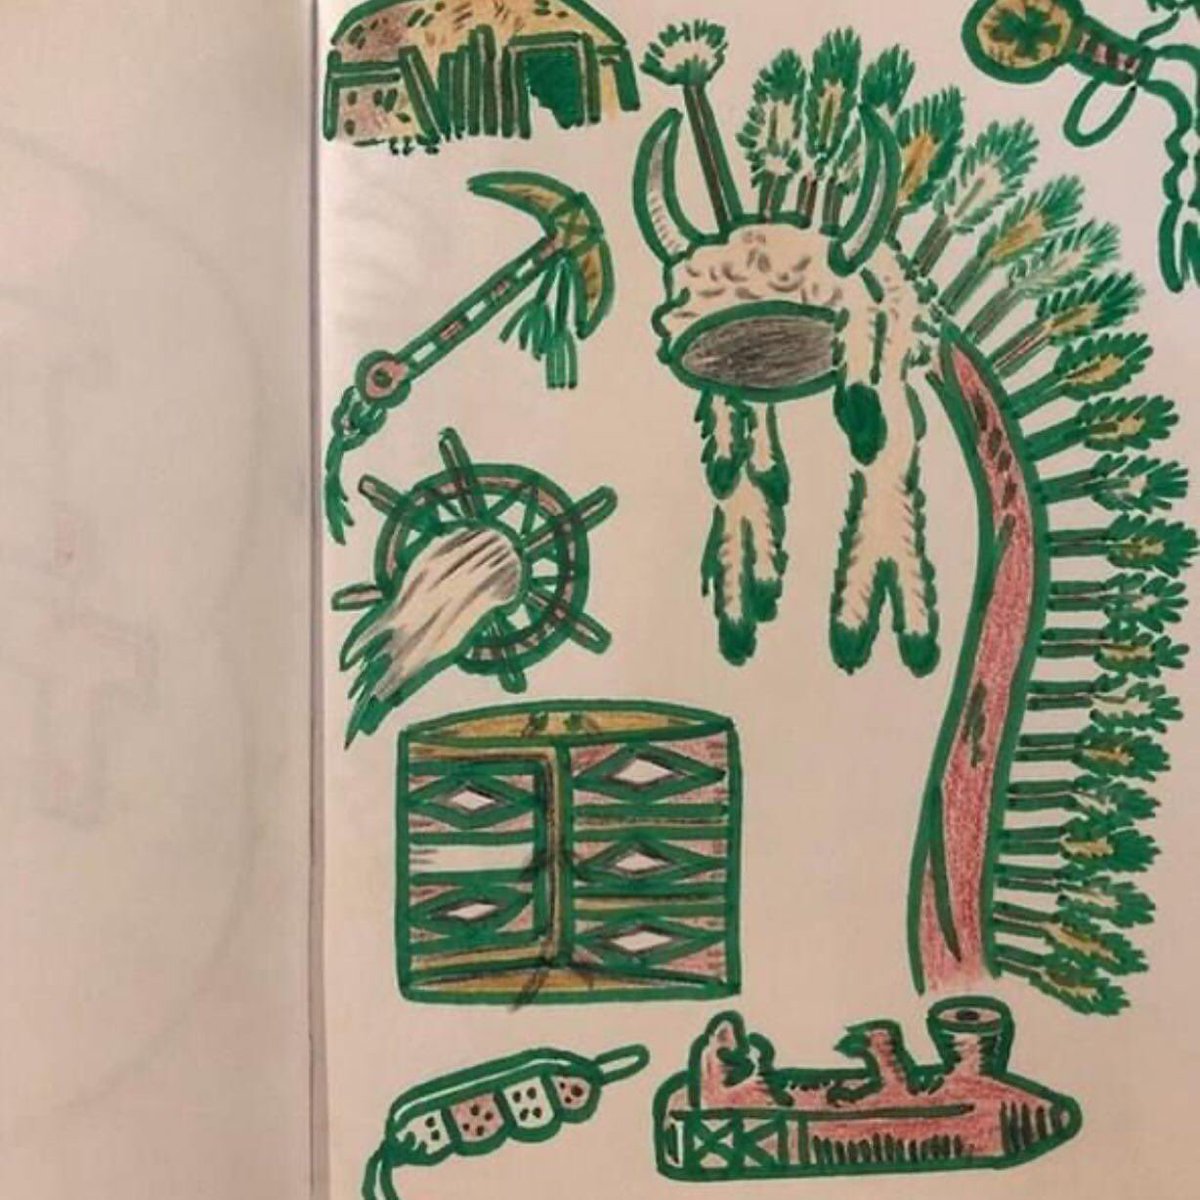 had this book with clothing and items The American Indians would use and wear and successfully replicated it with poscas, loved this kind of drawing as a kid so had to do this #drawing #art #americanindian #poscas #artstudio #creativeprojects #illustration #blackbook #sketching